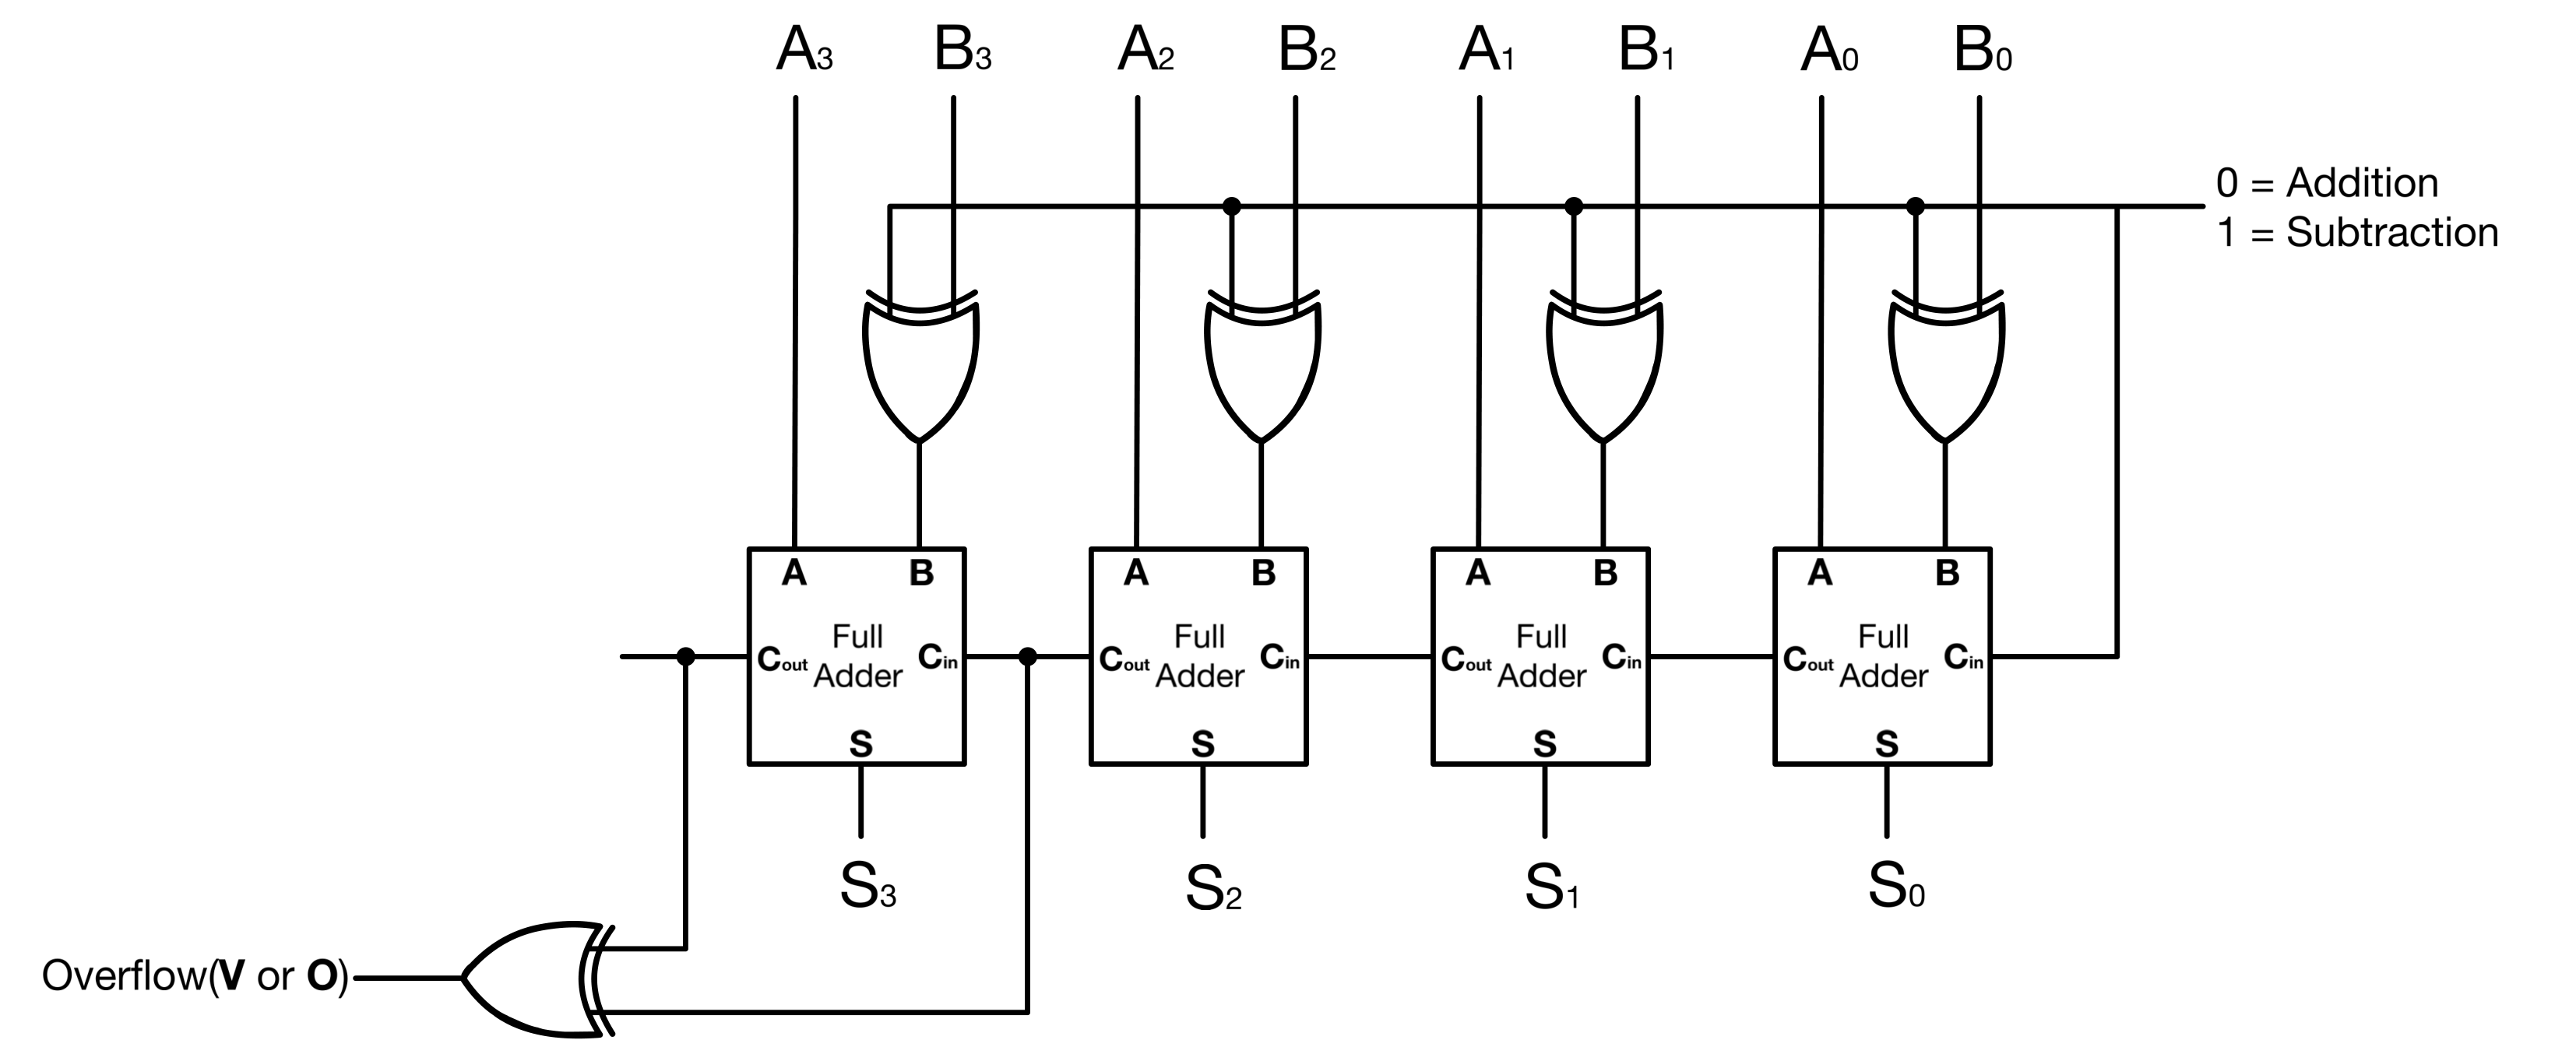 Figure 1: Full Subtractor With Overflow Check)